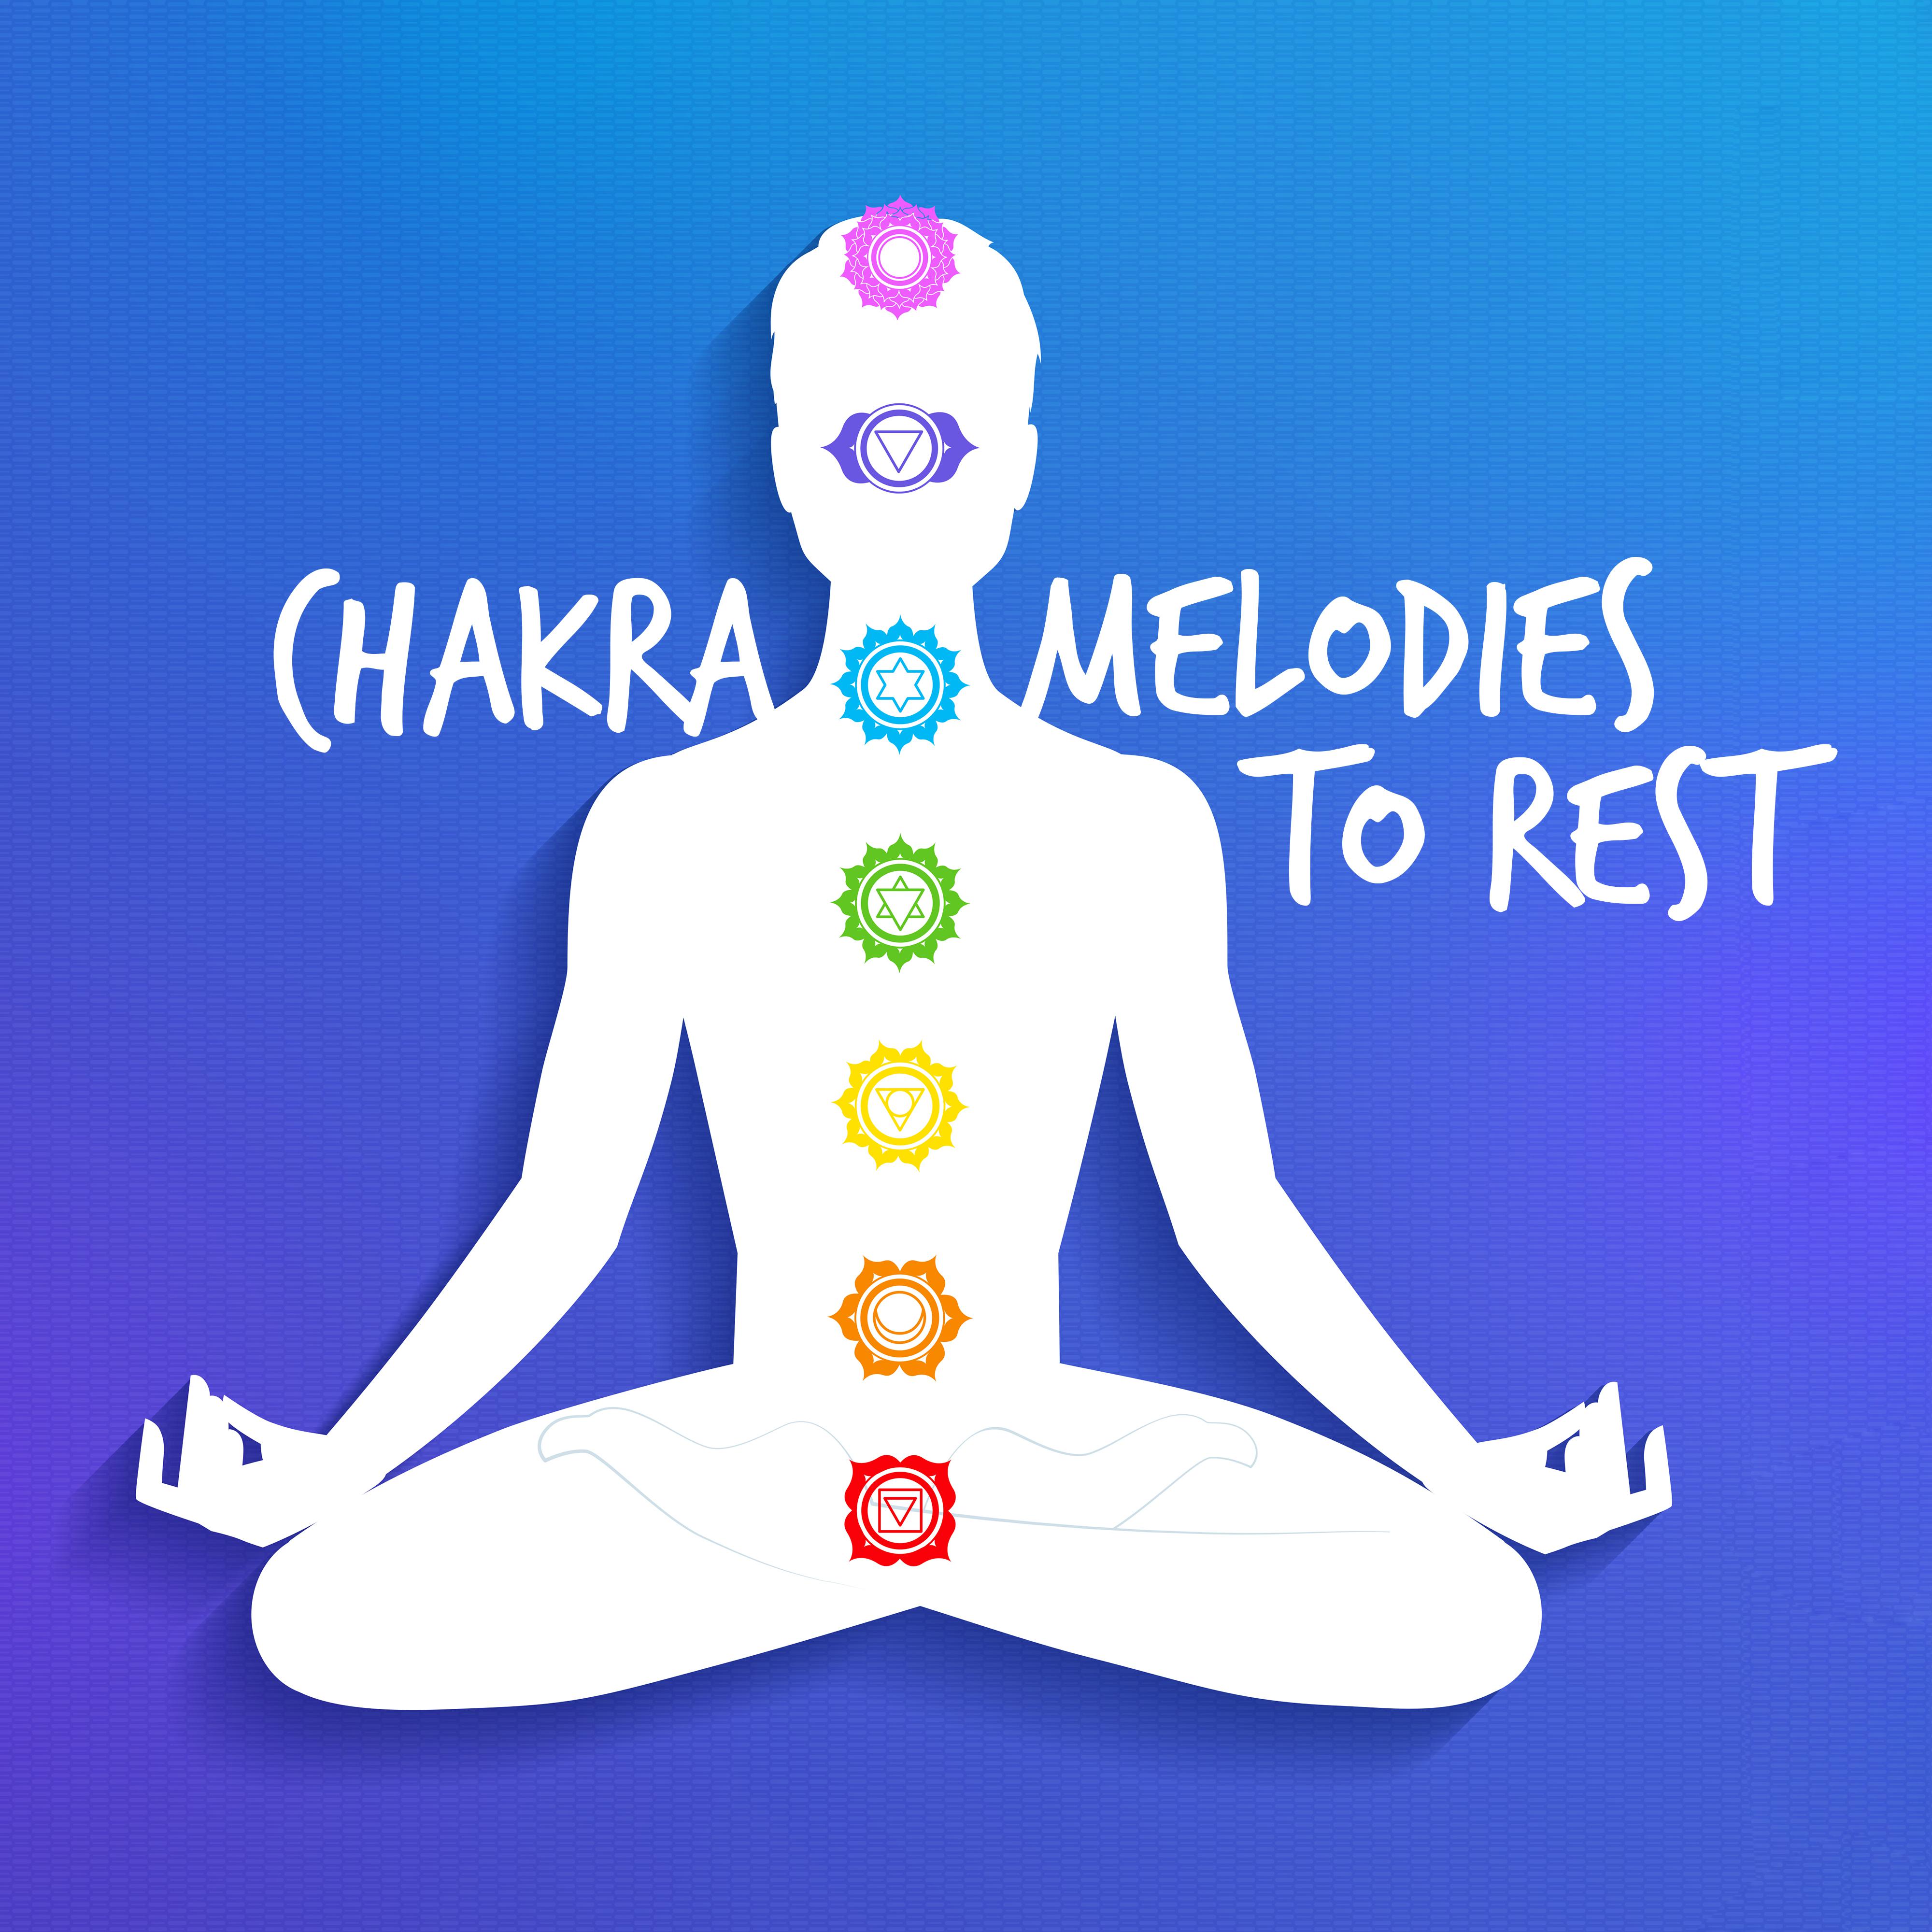 Chakra Melodies to Rest